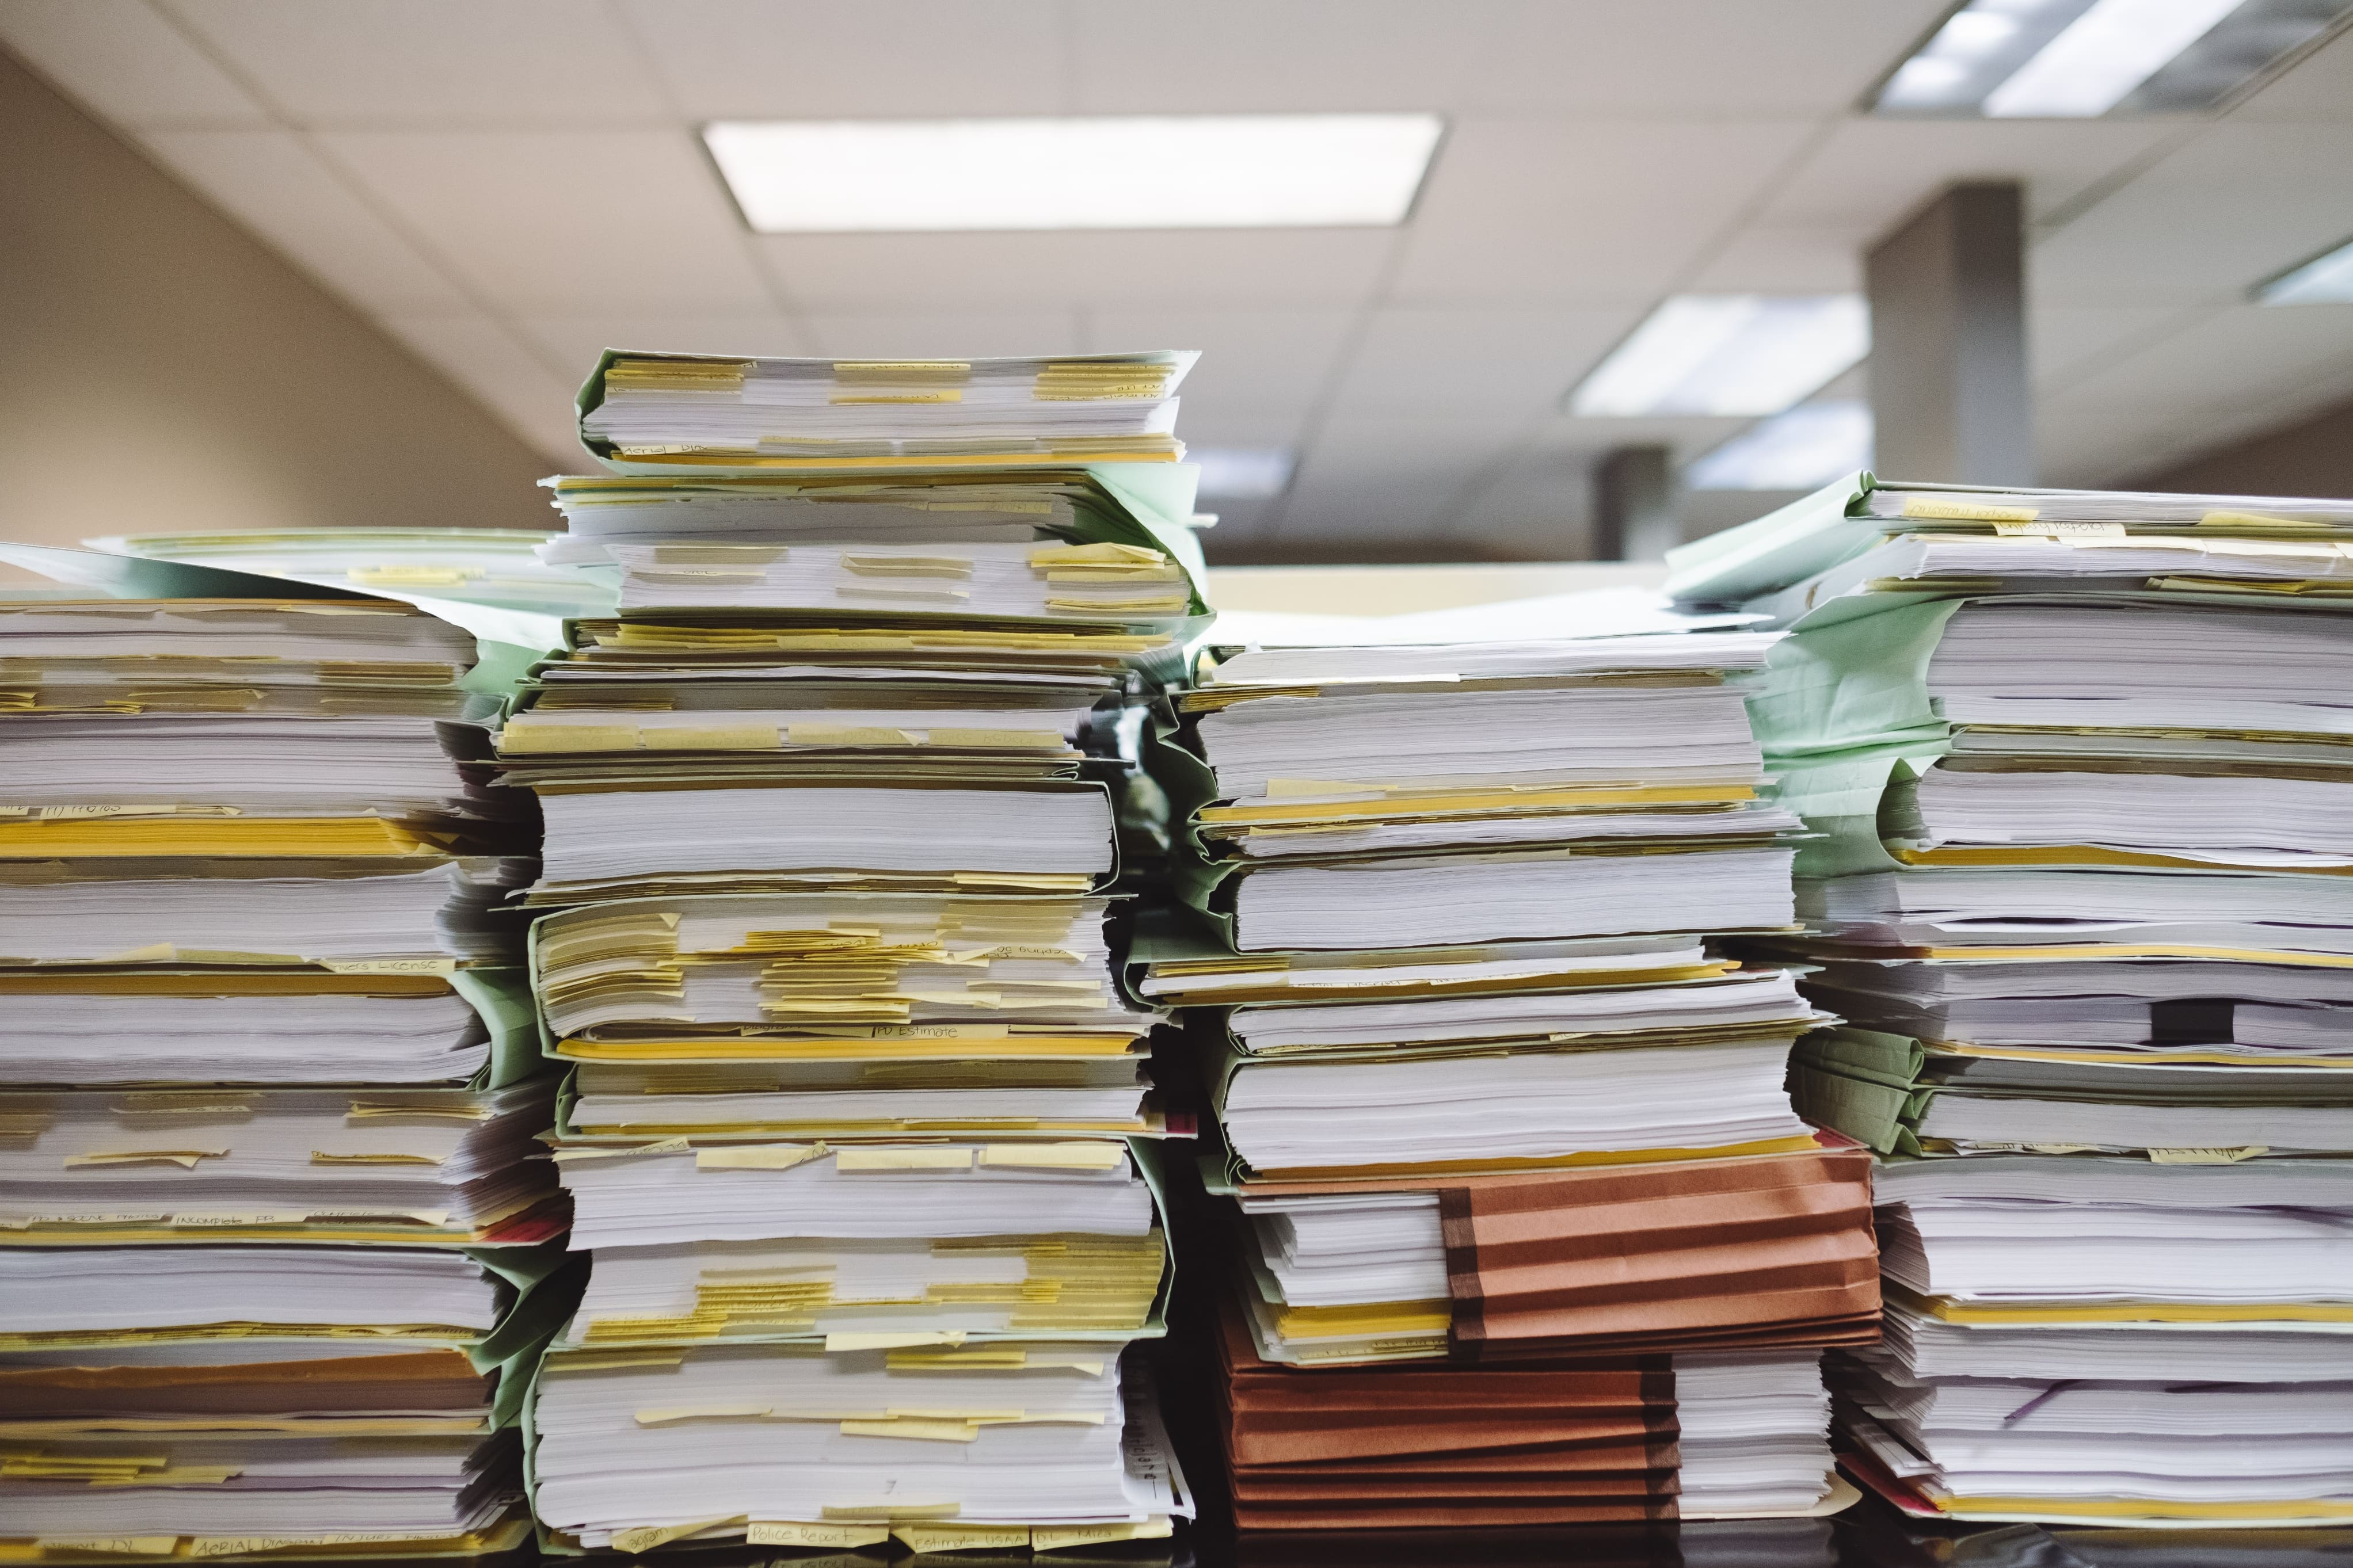 Want to make your system paperless?